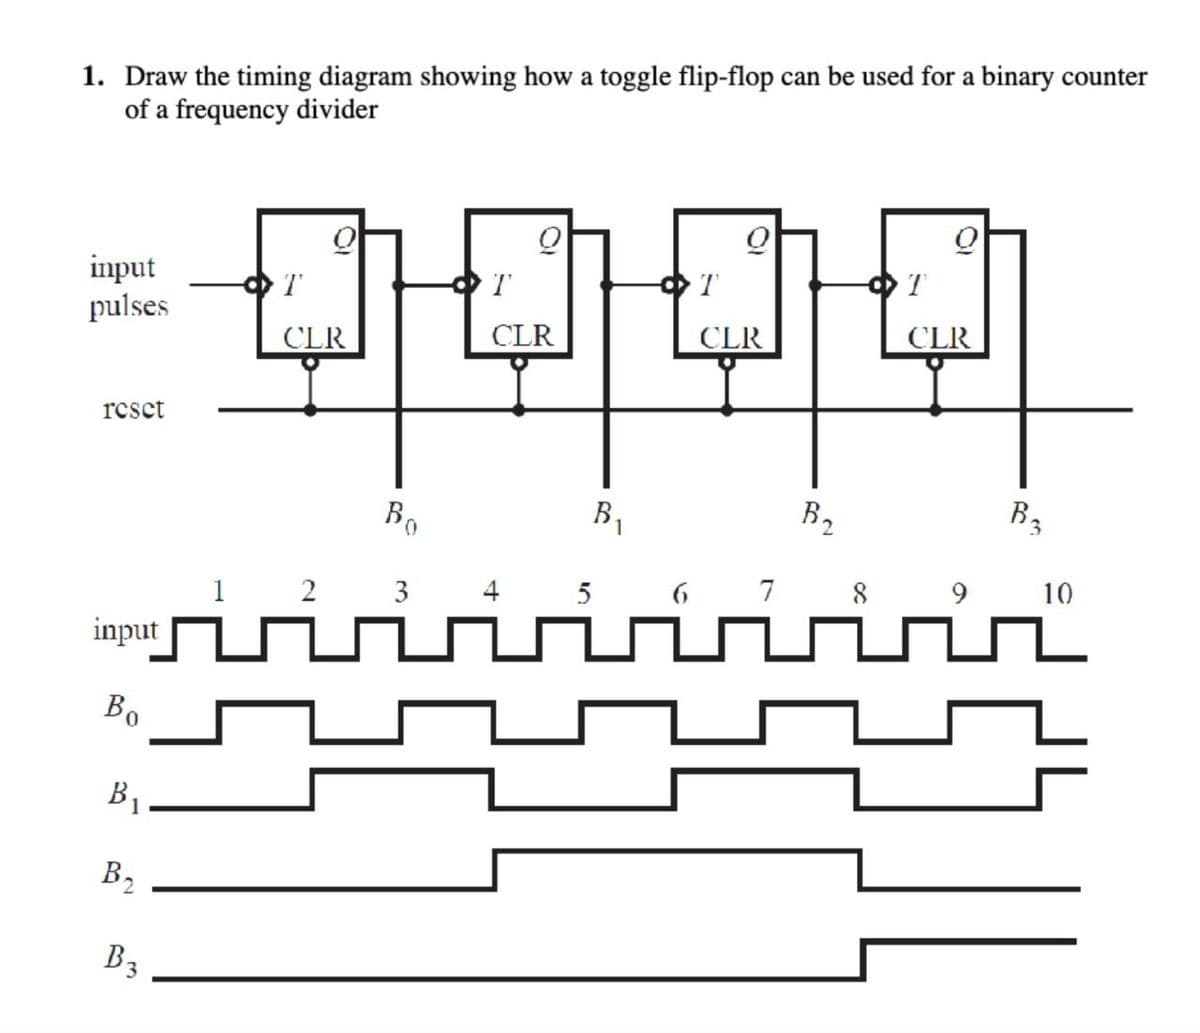 1. Draw the timing diagram showing how a toggle flip-flop can be used for a binary counter
of a frequency divider
input
pulses
reset
input
Bo
B₁
B₁₂
B3
T
CLR
1 2
Bo
3
T
CLR
B₁
5
6
T
CLR
7
B₂
T
CLR
8 9
B₂
10